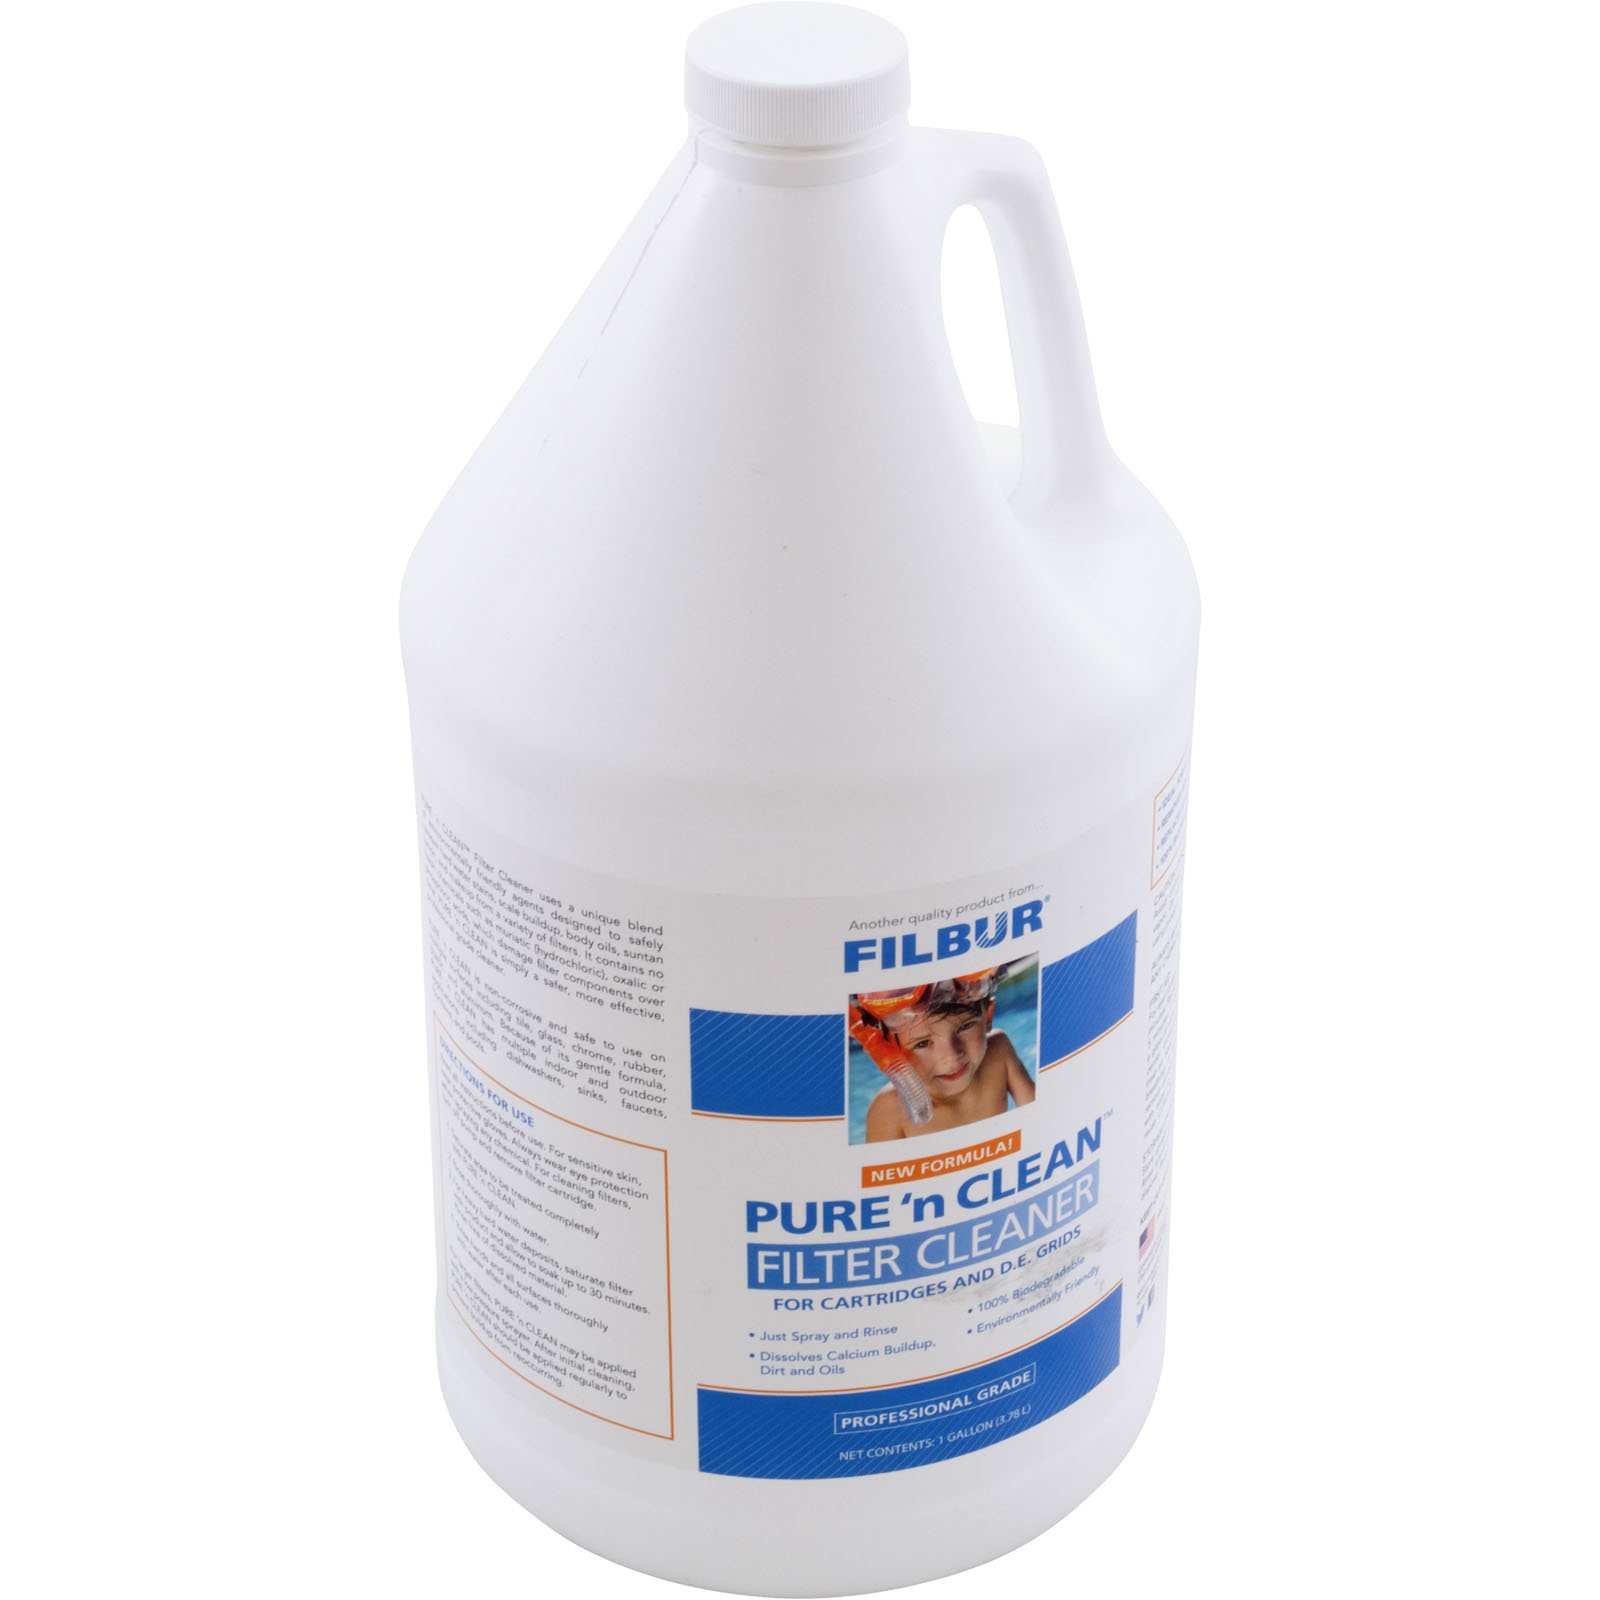 Picture of FC-6351 Cartridge and Grid Cleaner Filbur Pure and Clean 1 Gallon